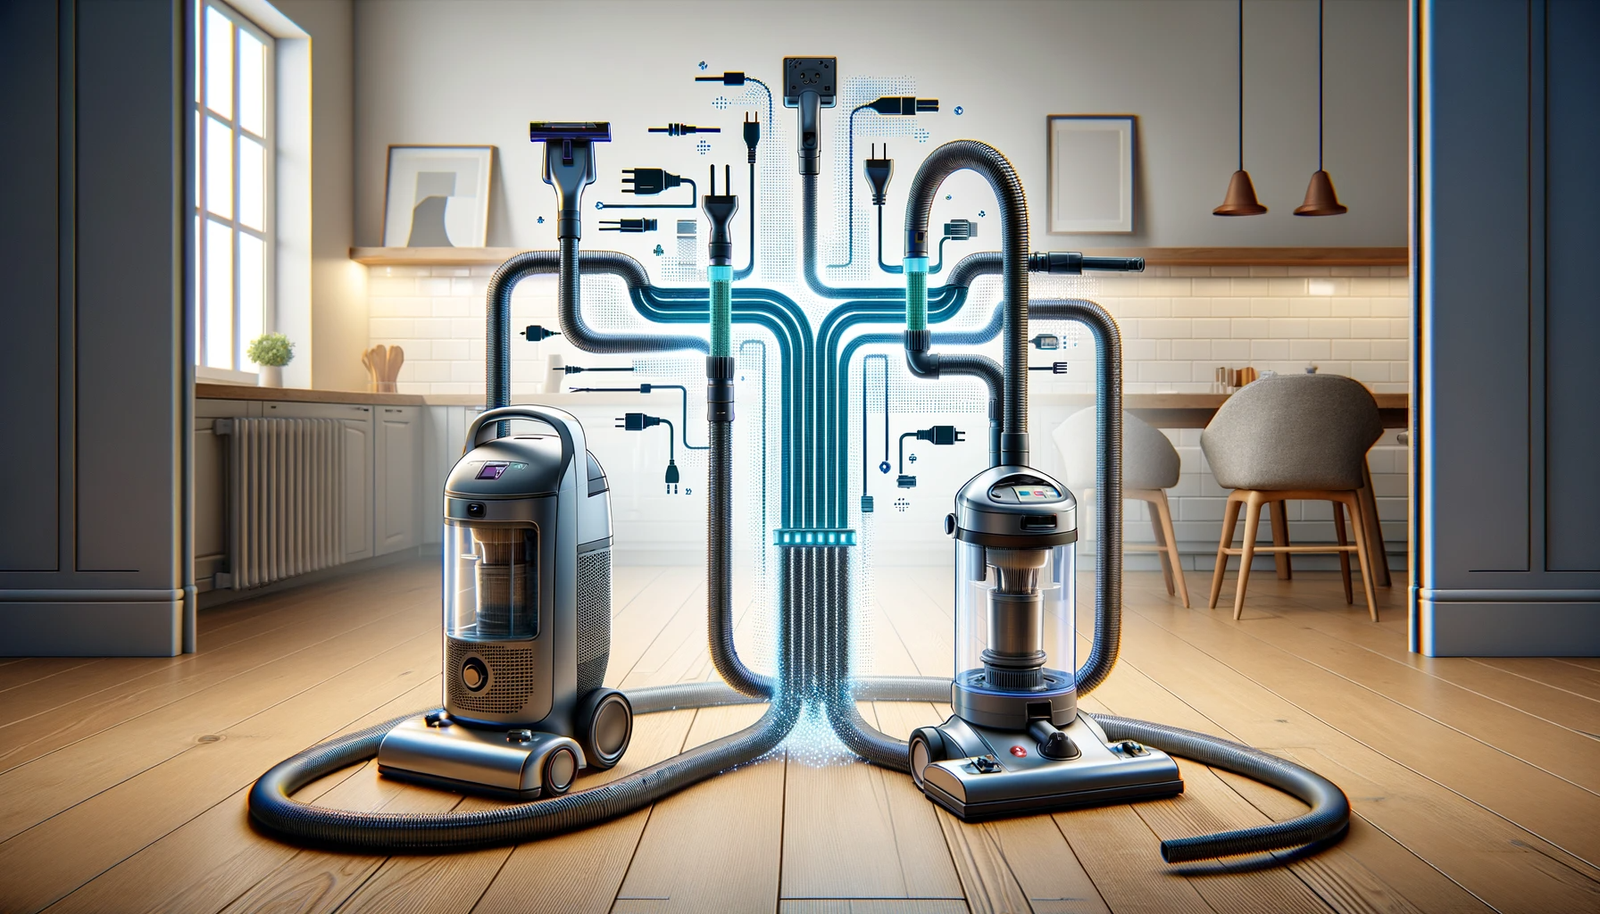 How to Connect Two Vacuum Cleaners?